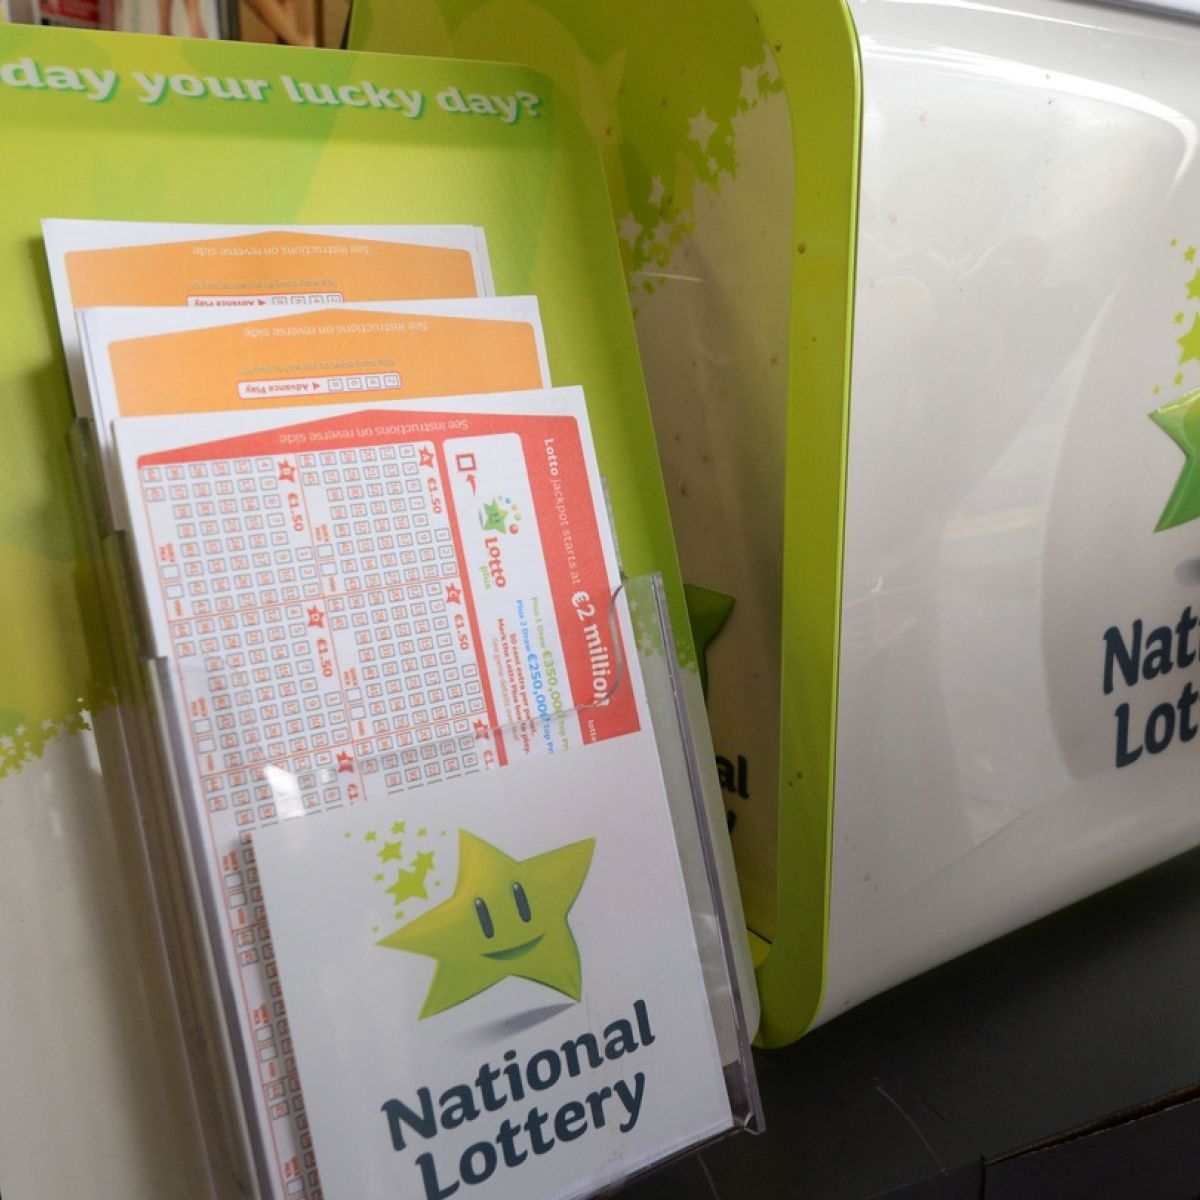 Lotto prize of €1m remains unclaimed 